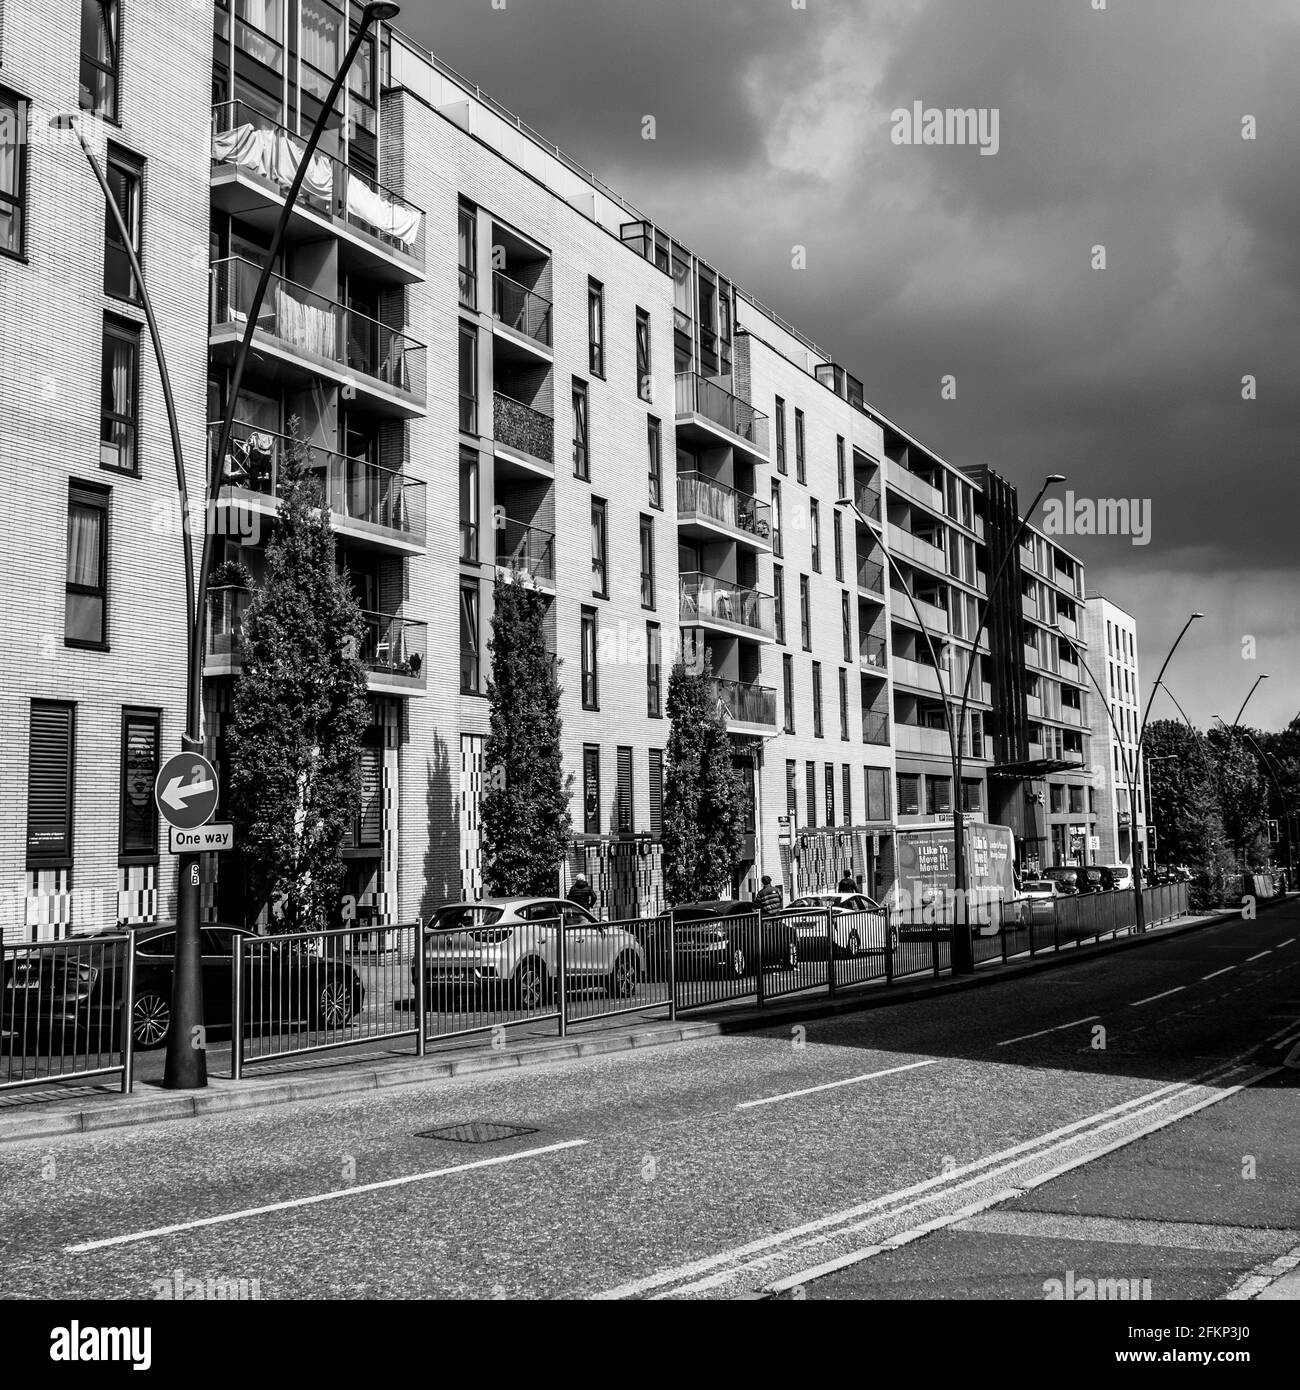 Epsom Surrey London UK, May 02 2021, Modern Development Of High Rise Apartments With No People Stock Photo